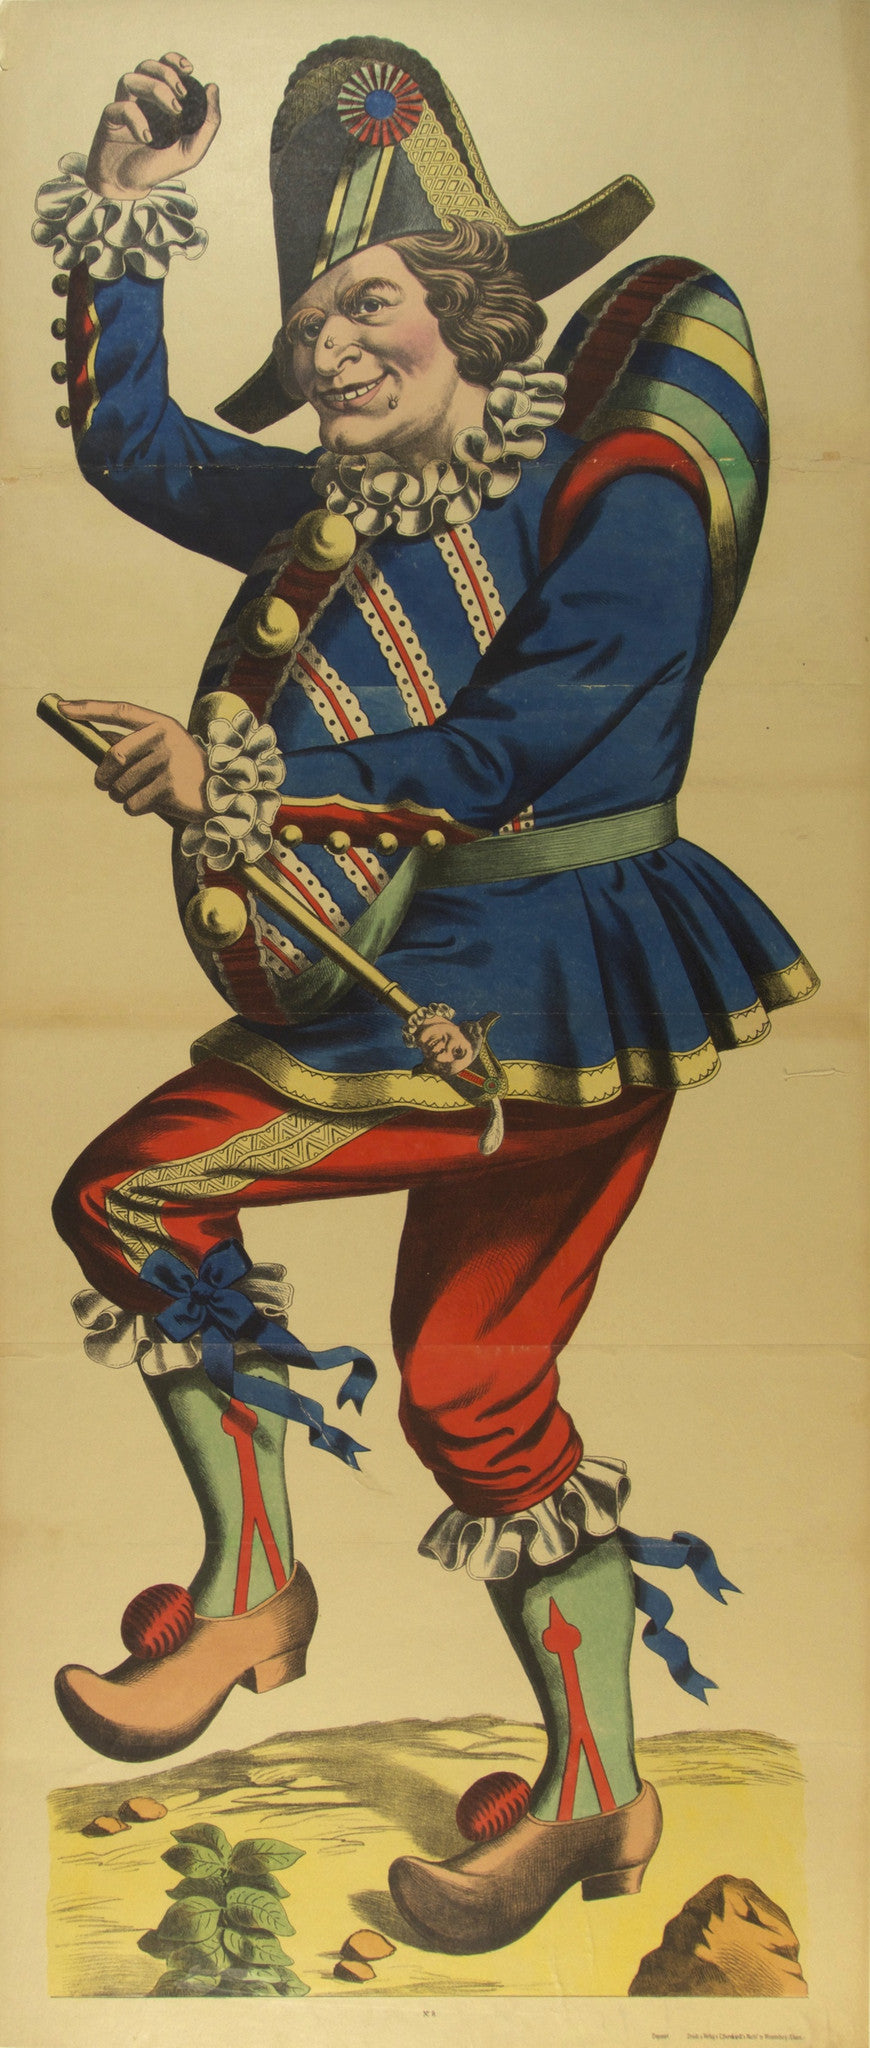 the court jester poster